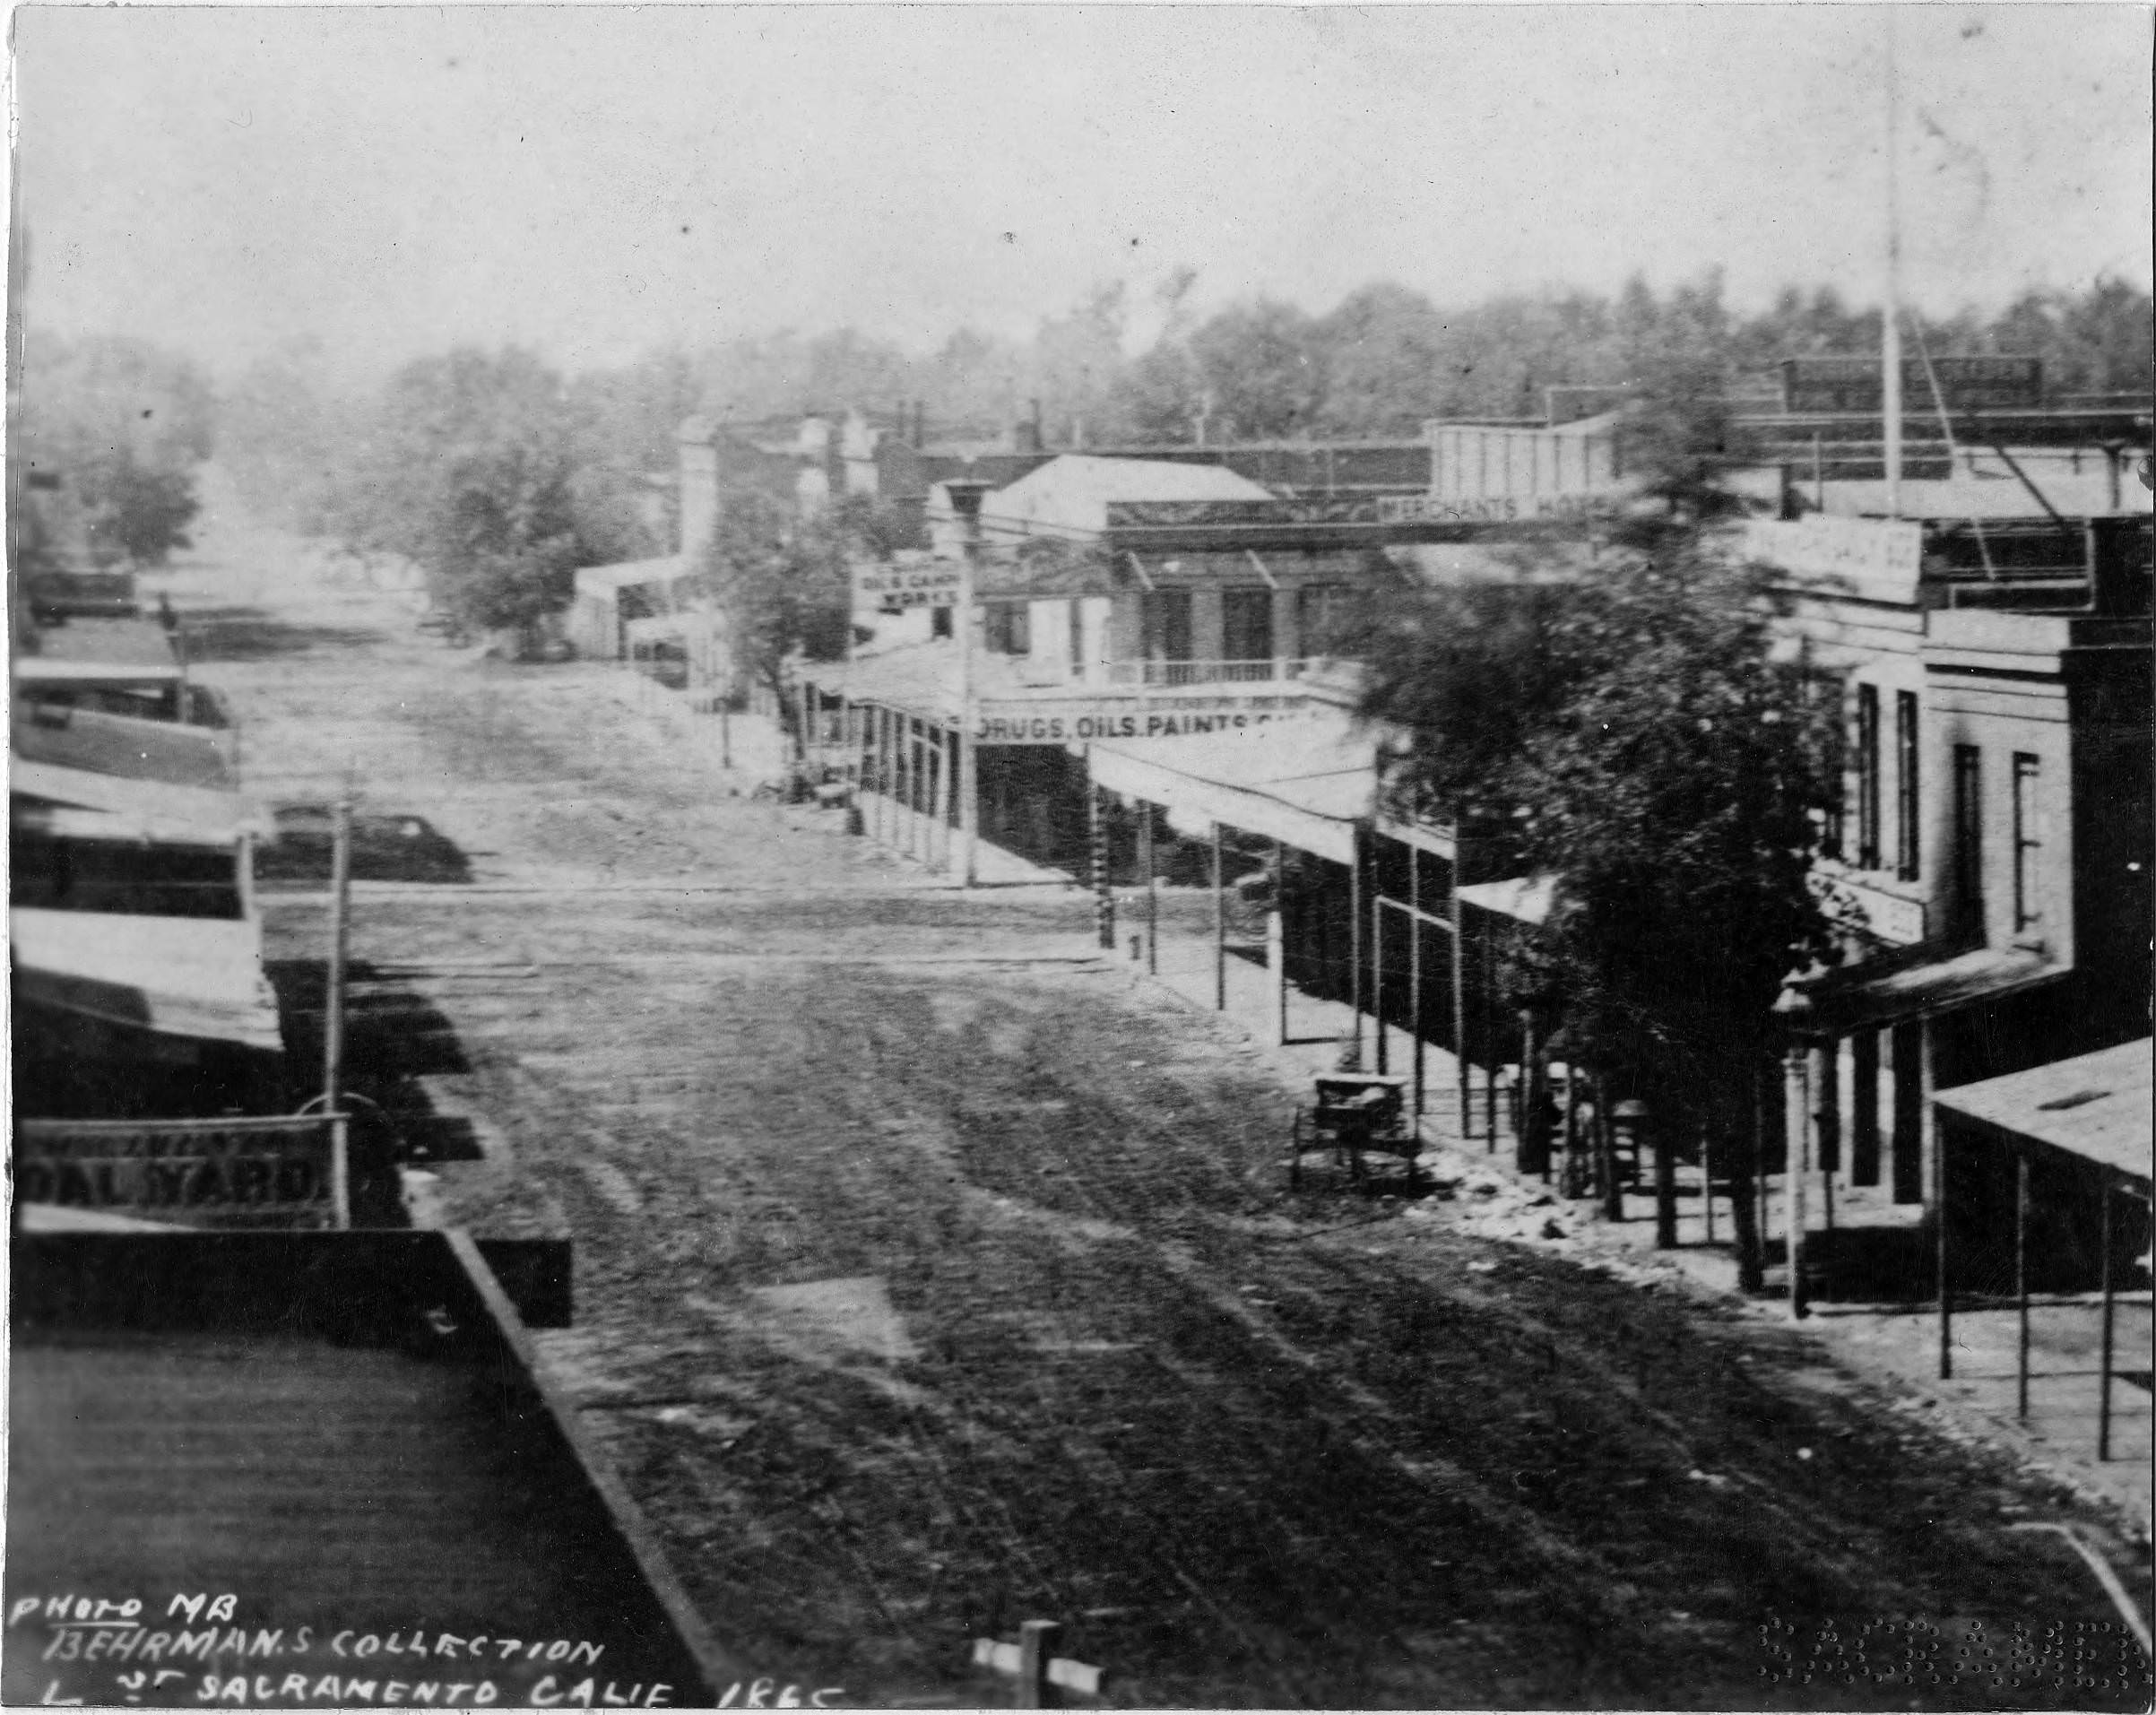 L Street circa 1865 is depicted with unpaved streets and wooden sidewalks, 1865